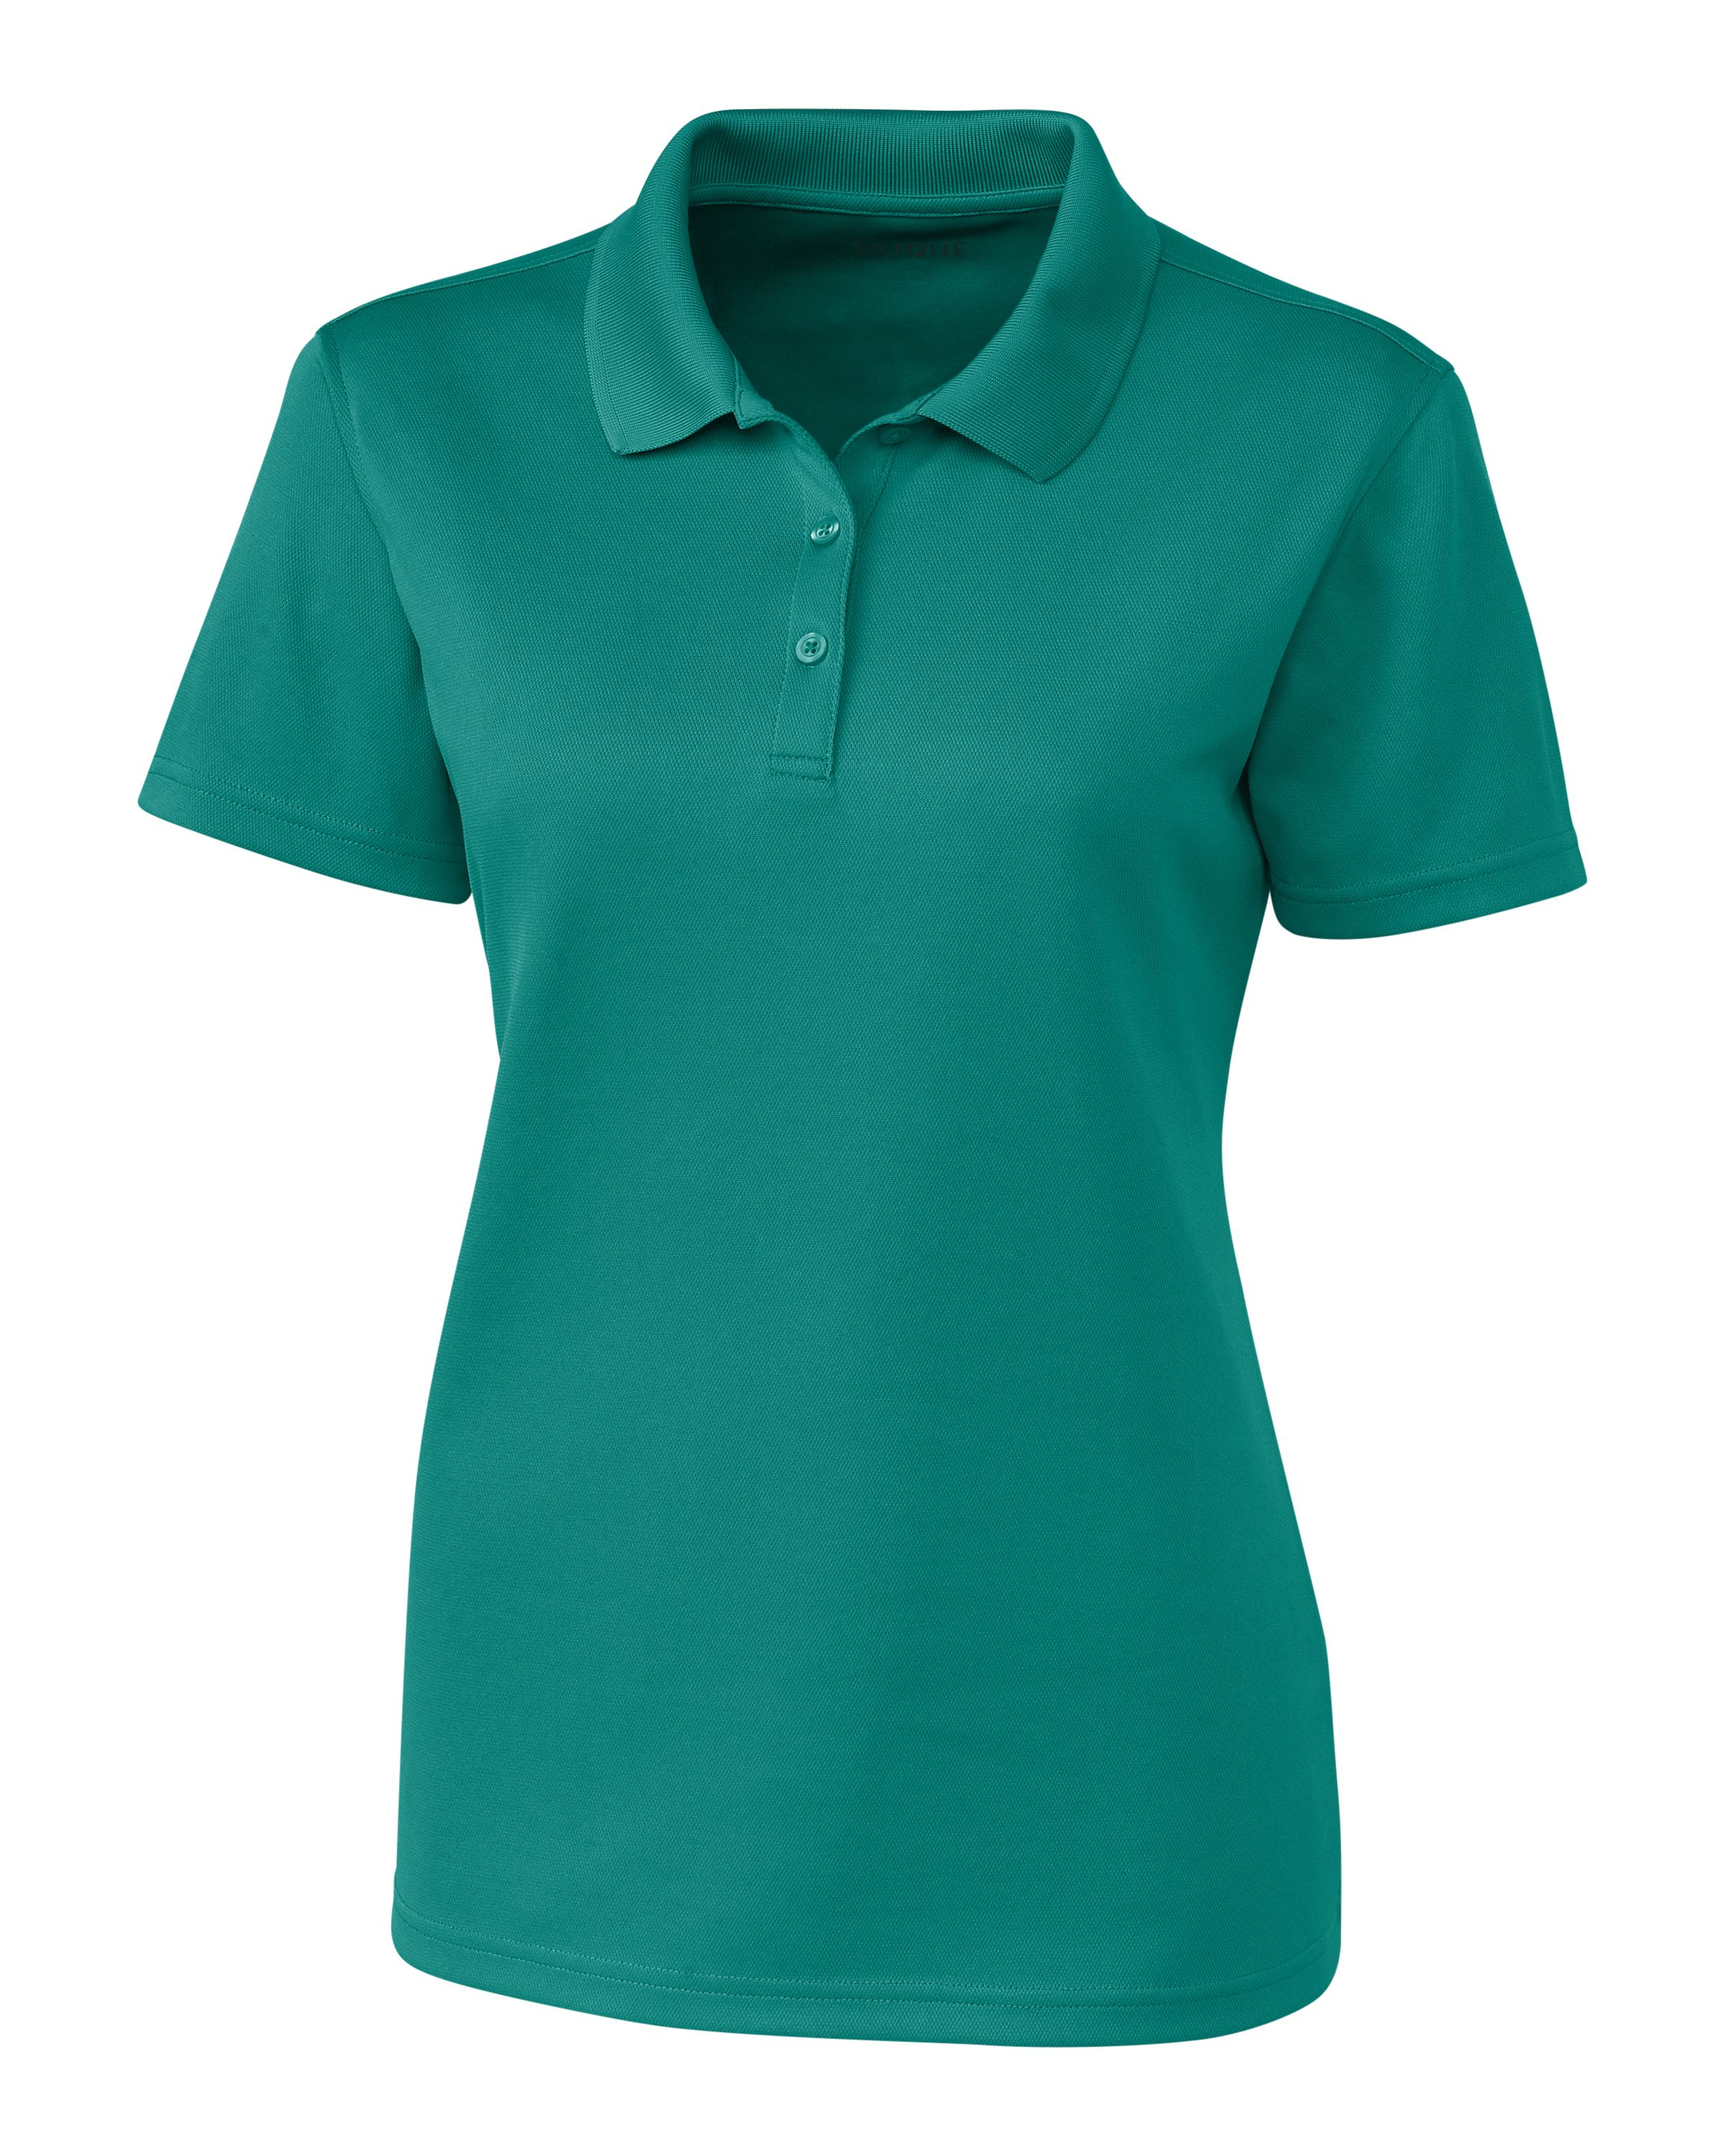 click to view Teal Green(TG)